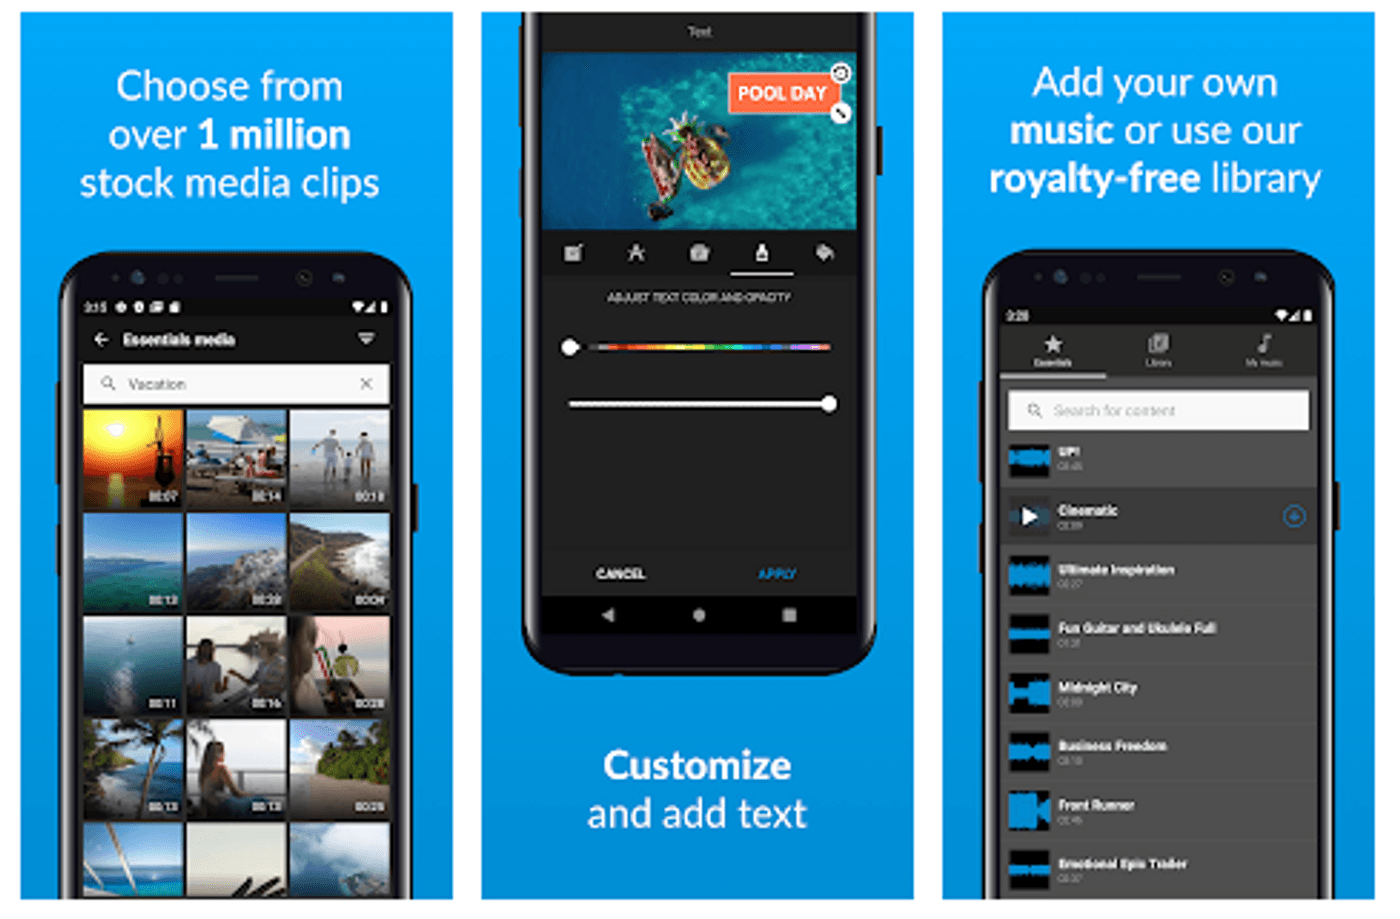 YouCut AI Video Editor: Revolutionizing Video Editing with AI Technology